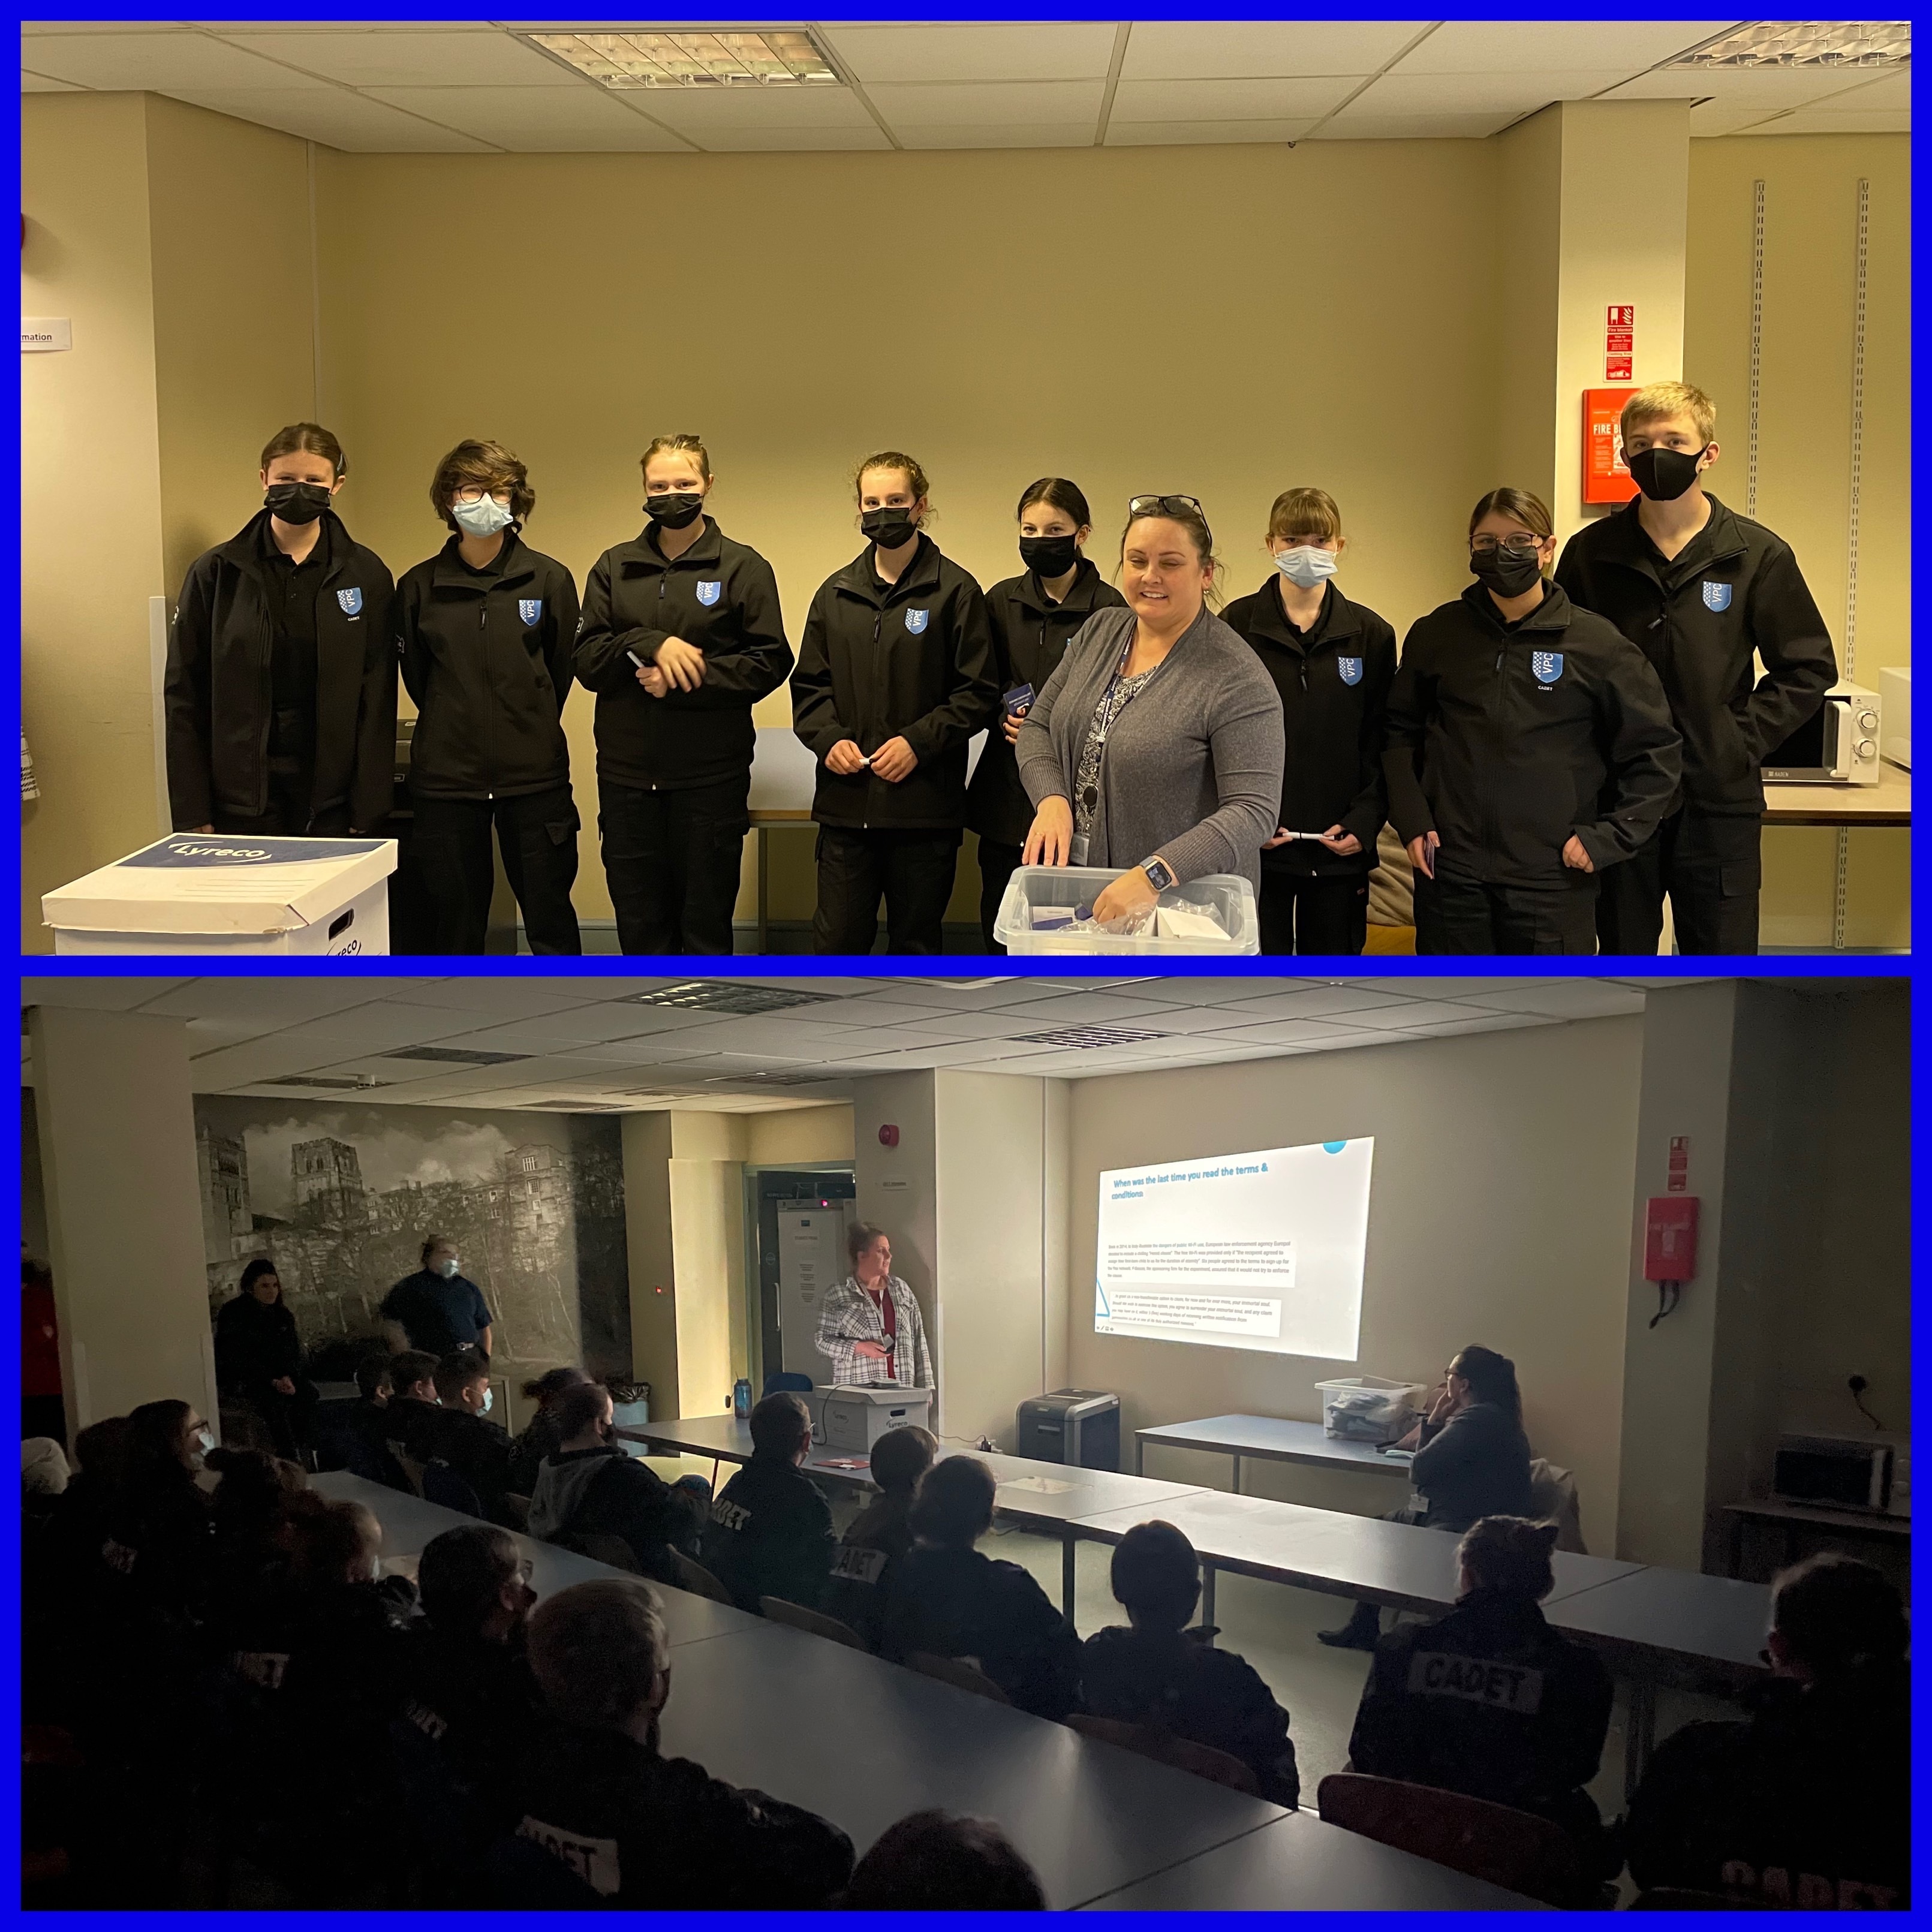 Cyber Prevent, Protect and Prepare input given to Police Cadets 